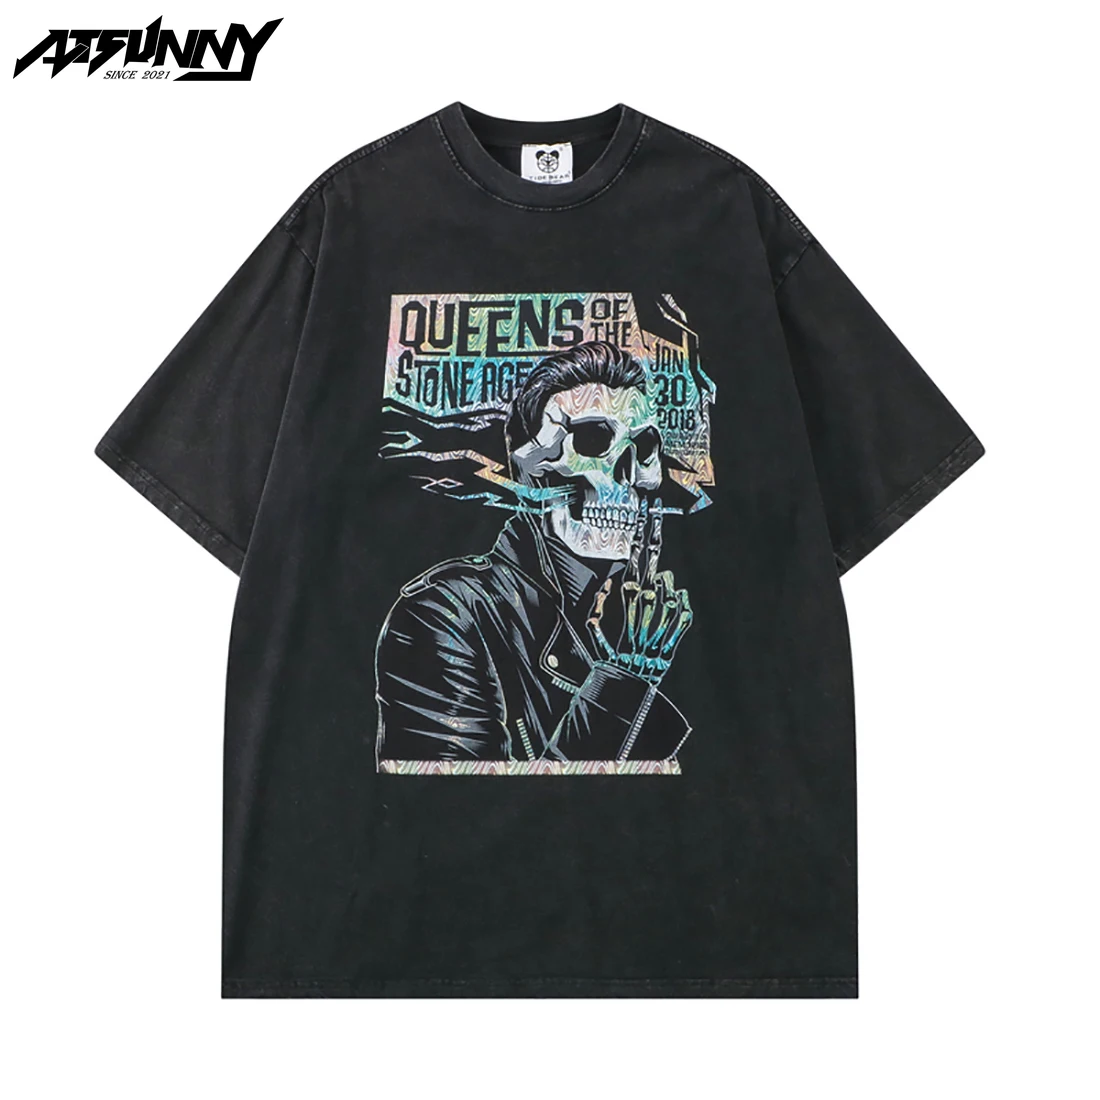 

ATSUNNY QUEENS OF THE STONE RGE Print T-shirt Skeleton Hip Hop Harajuku Shirt Pullover Streetwear Retro Gothic Clothes Tops